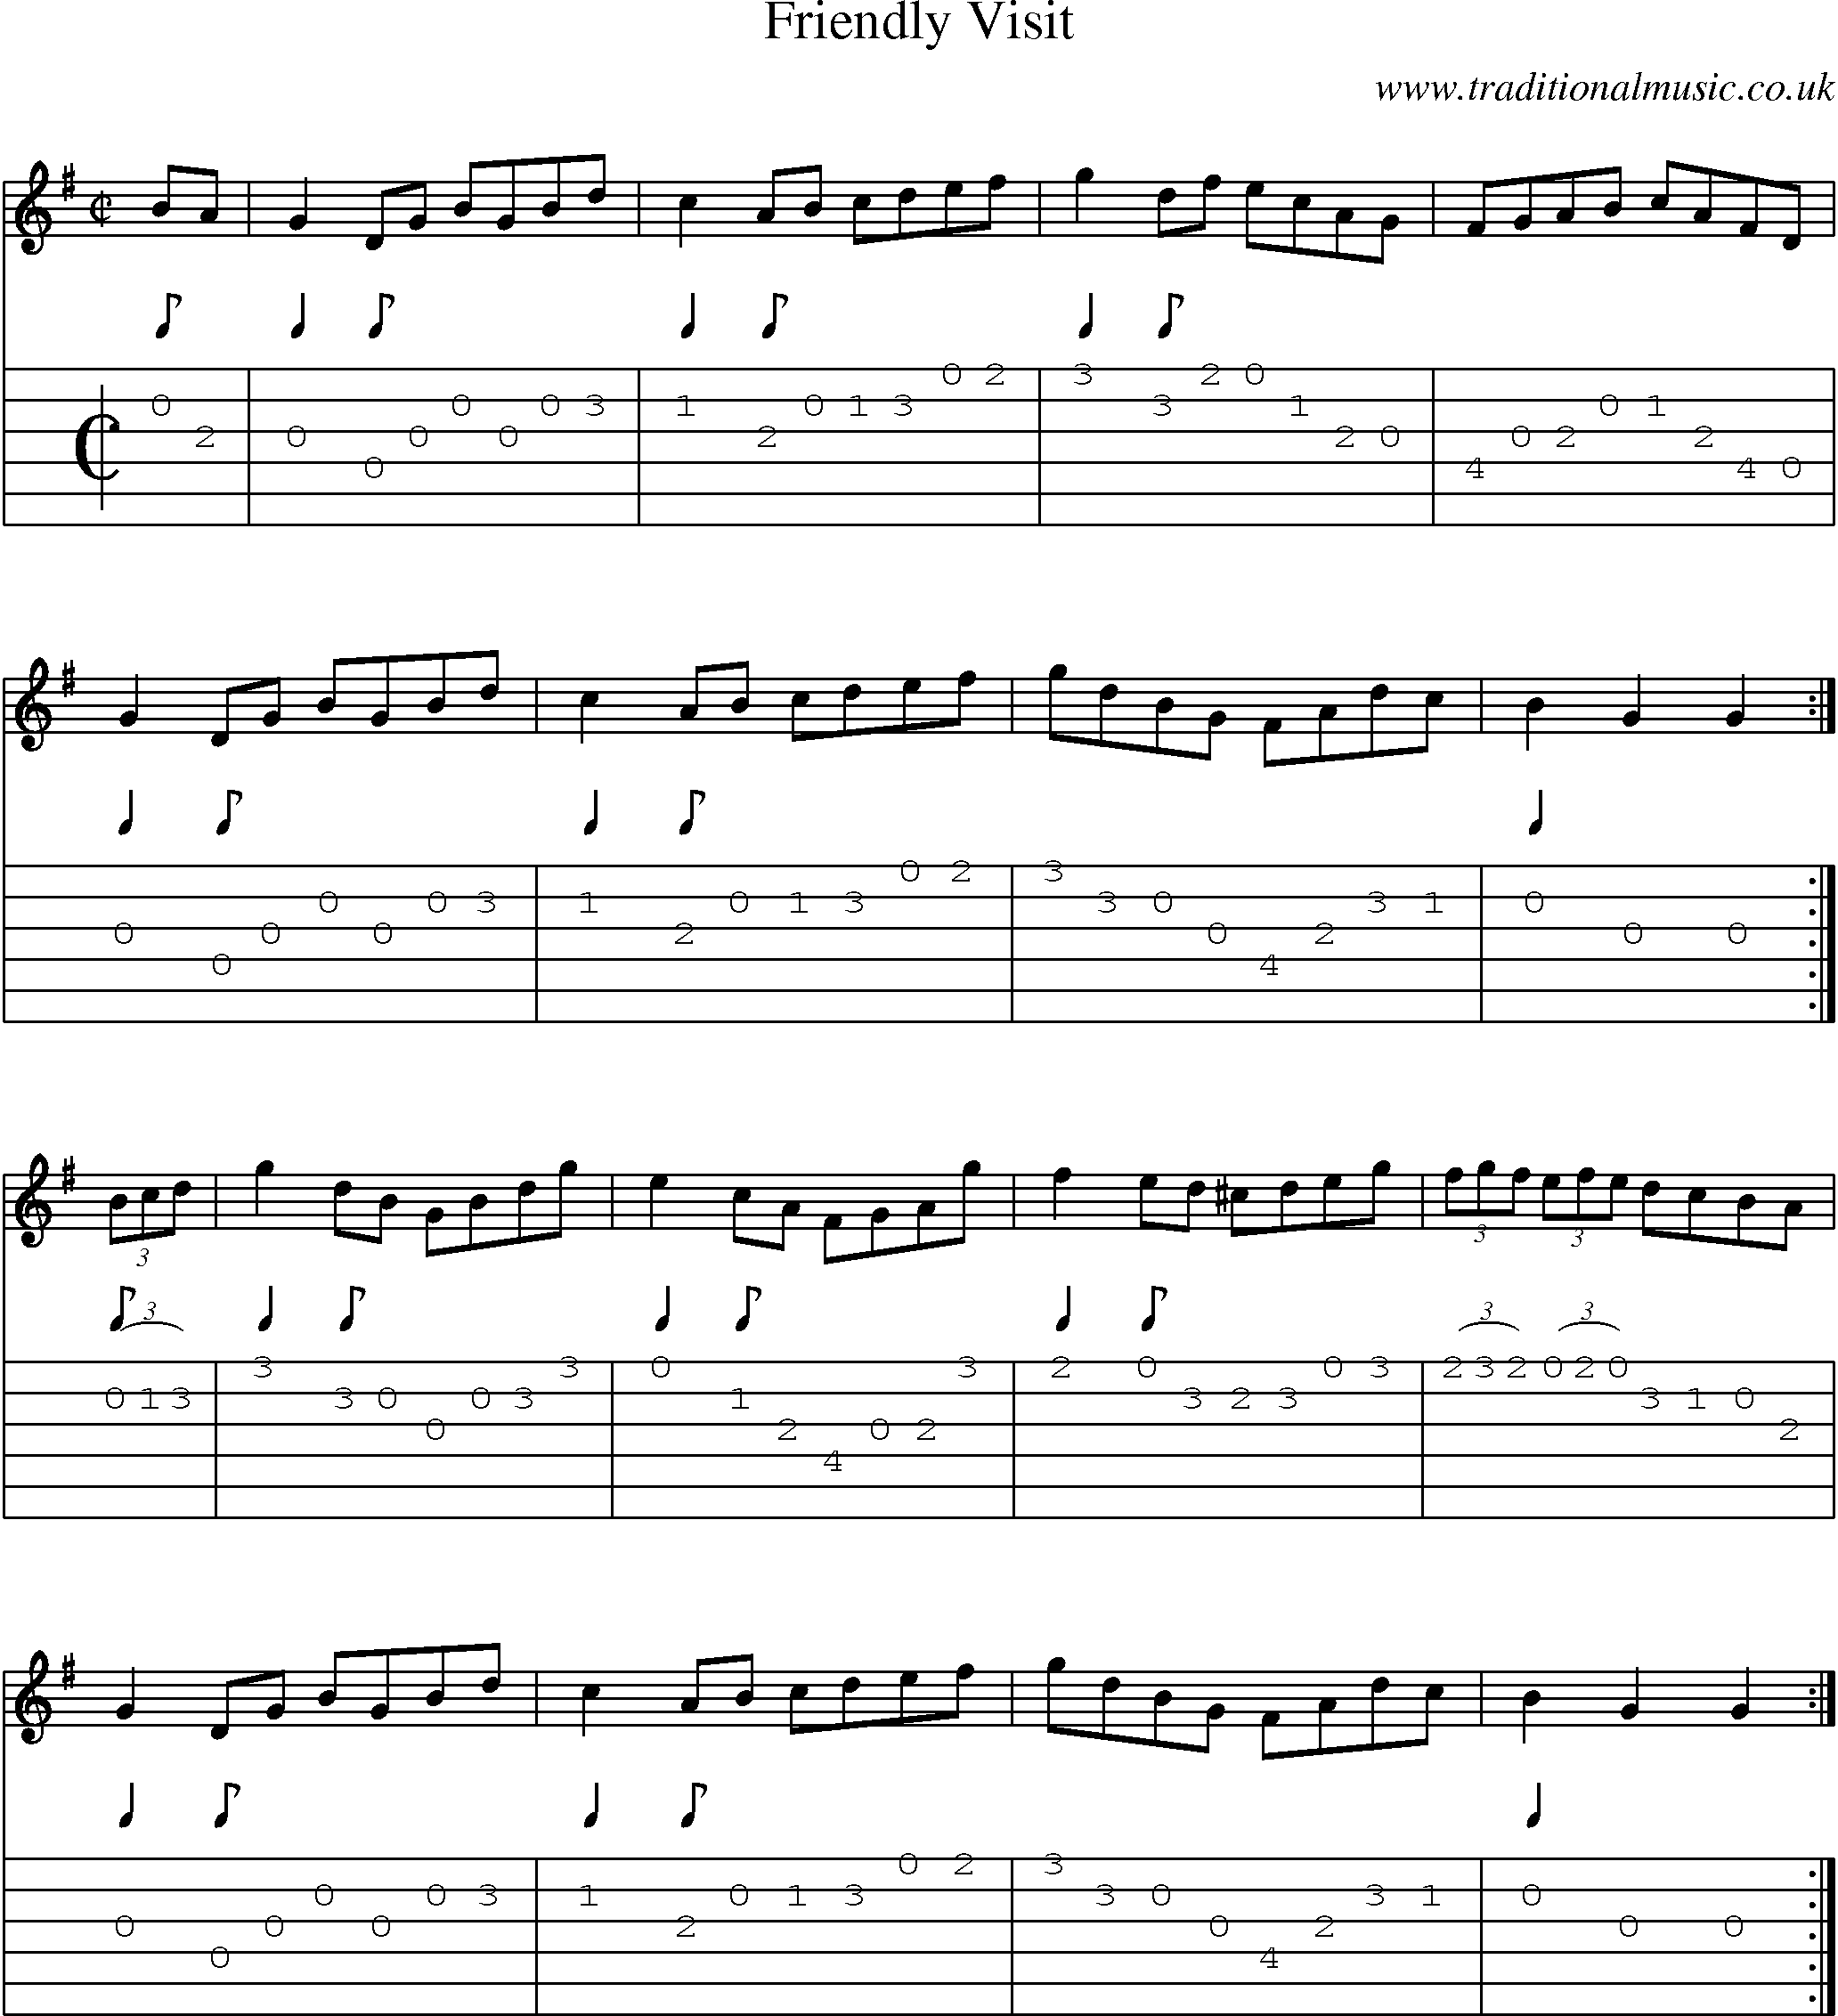 Music Score and Guitar Tabs for Friendly Visit